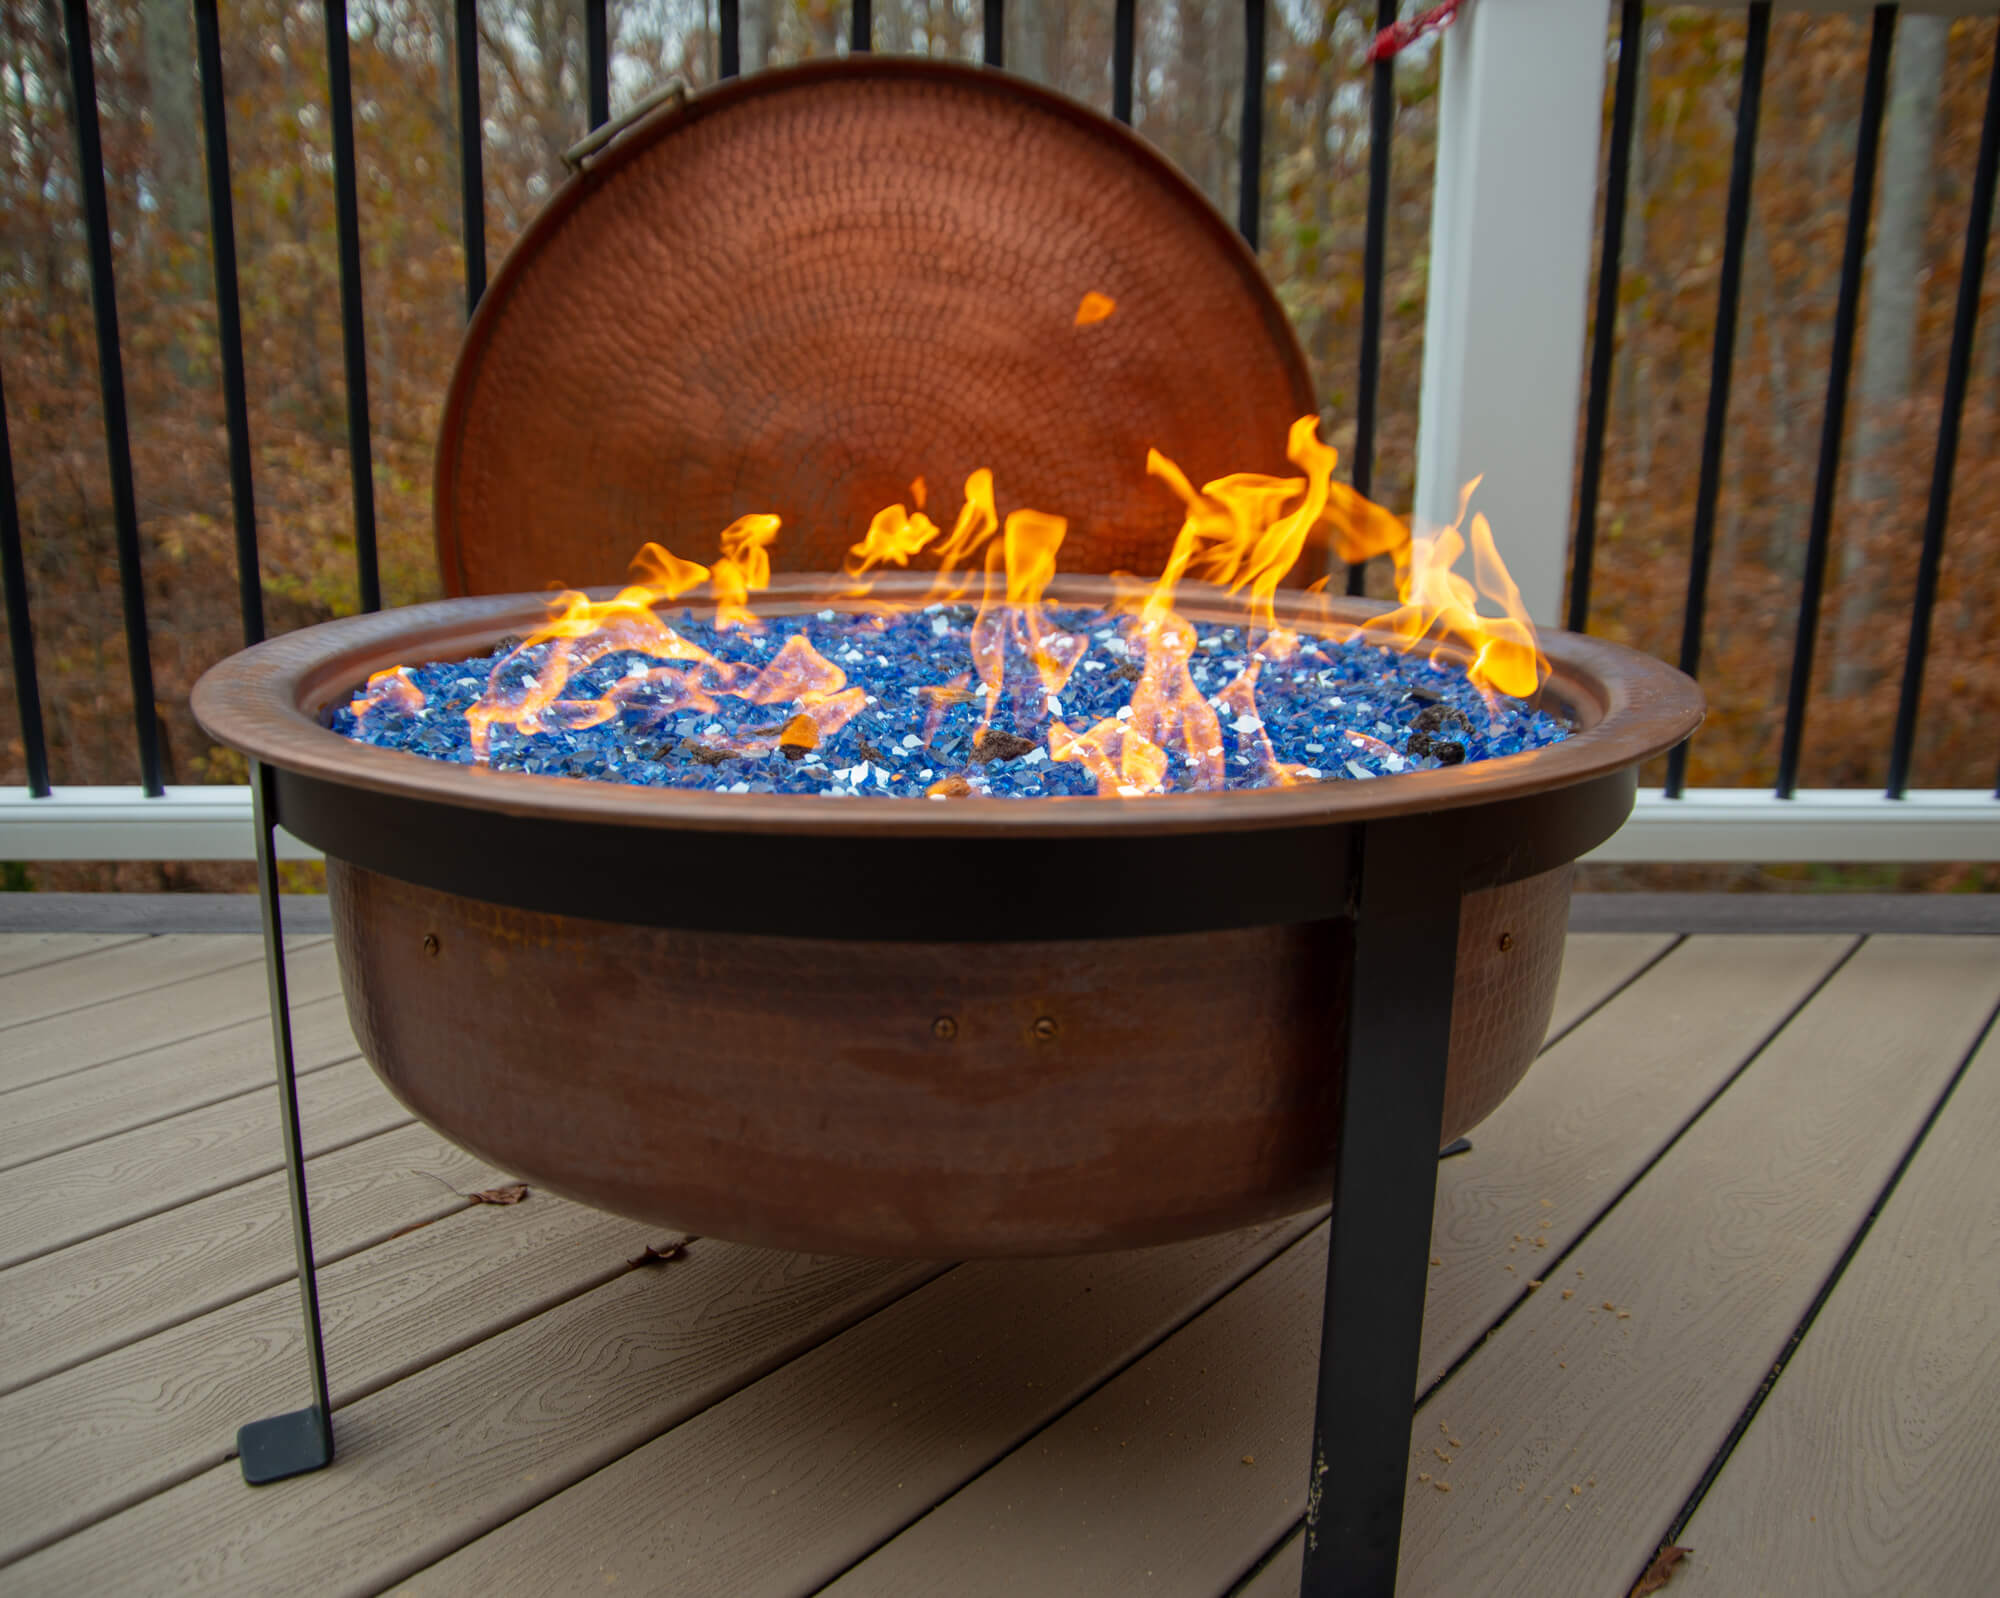 6 Ways To Put A Fire Pit On Wooden Deck, Can You Put A Fire Pit On A Wood Deck